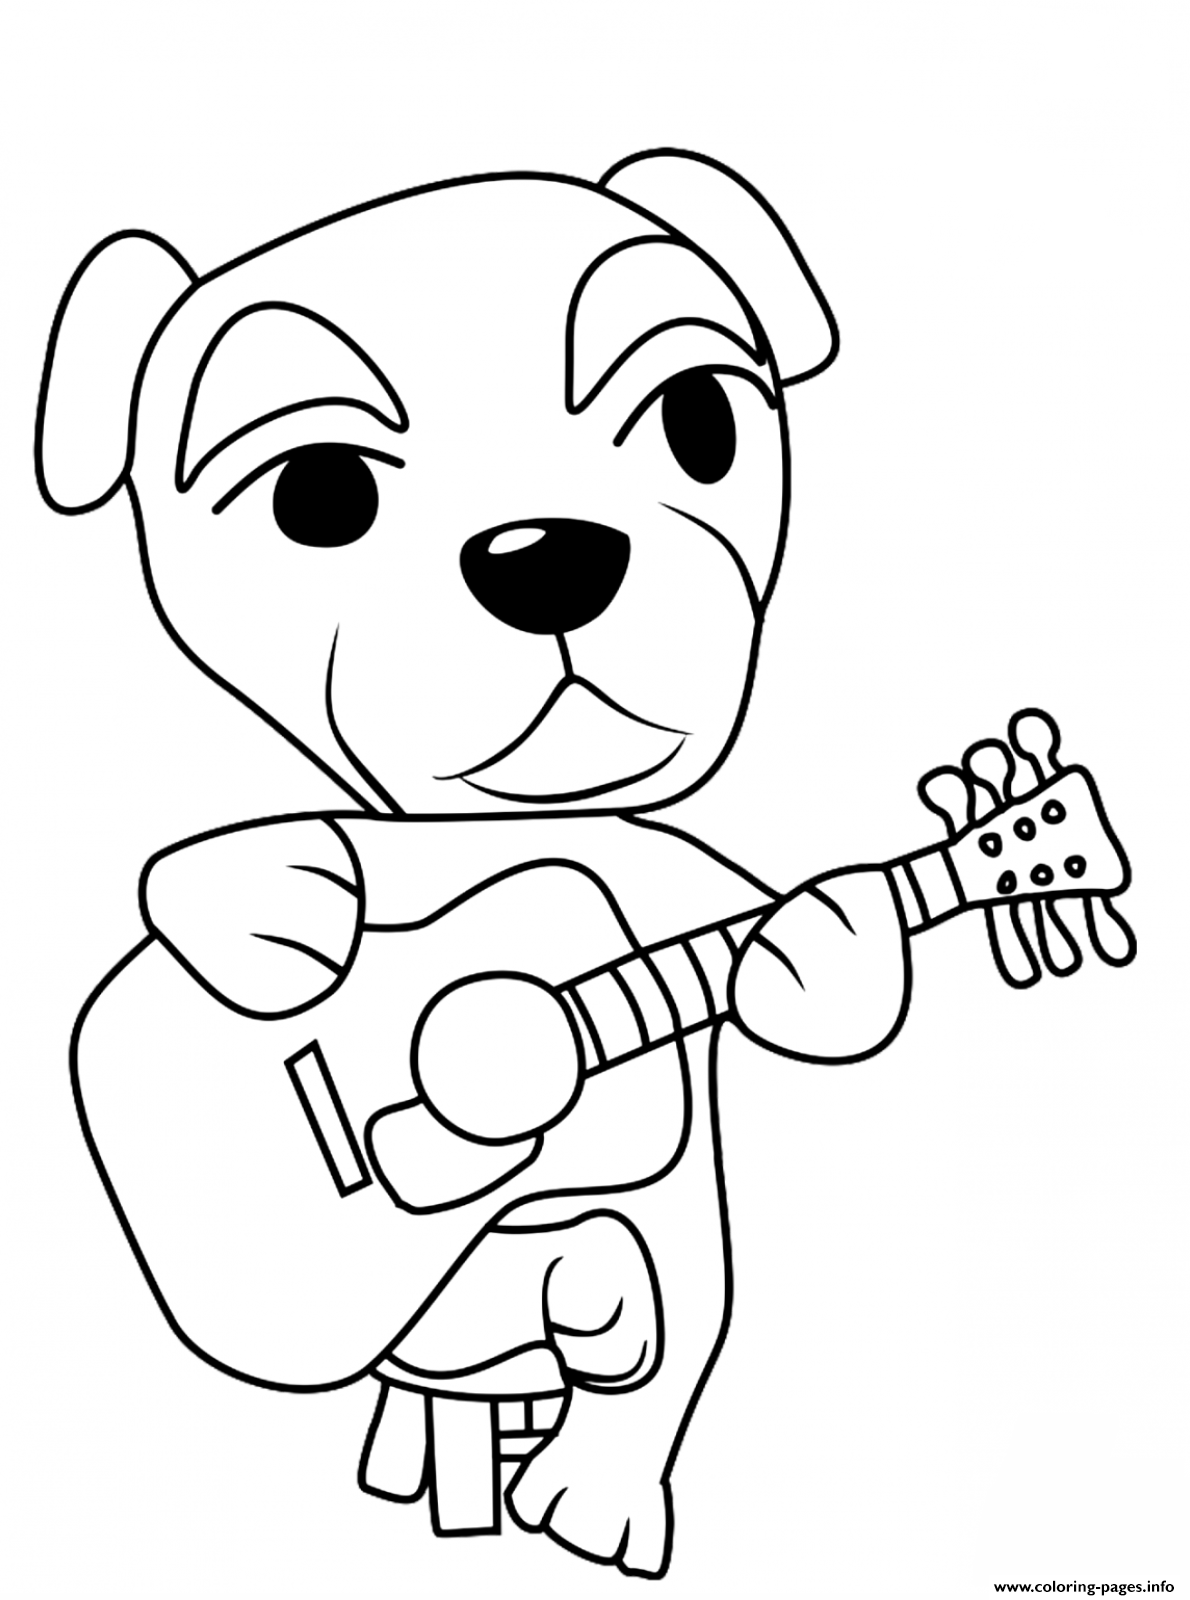 K.K Slider Coloring Pages   Cute Animal Coloring Pages   Coloring ...